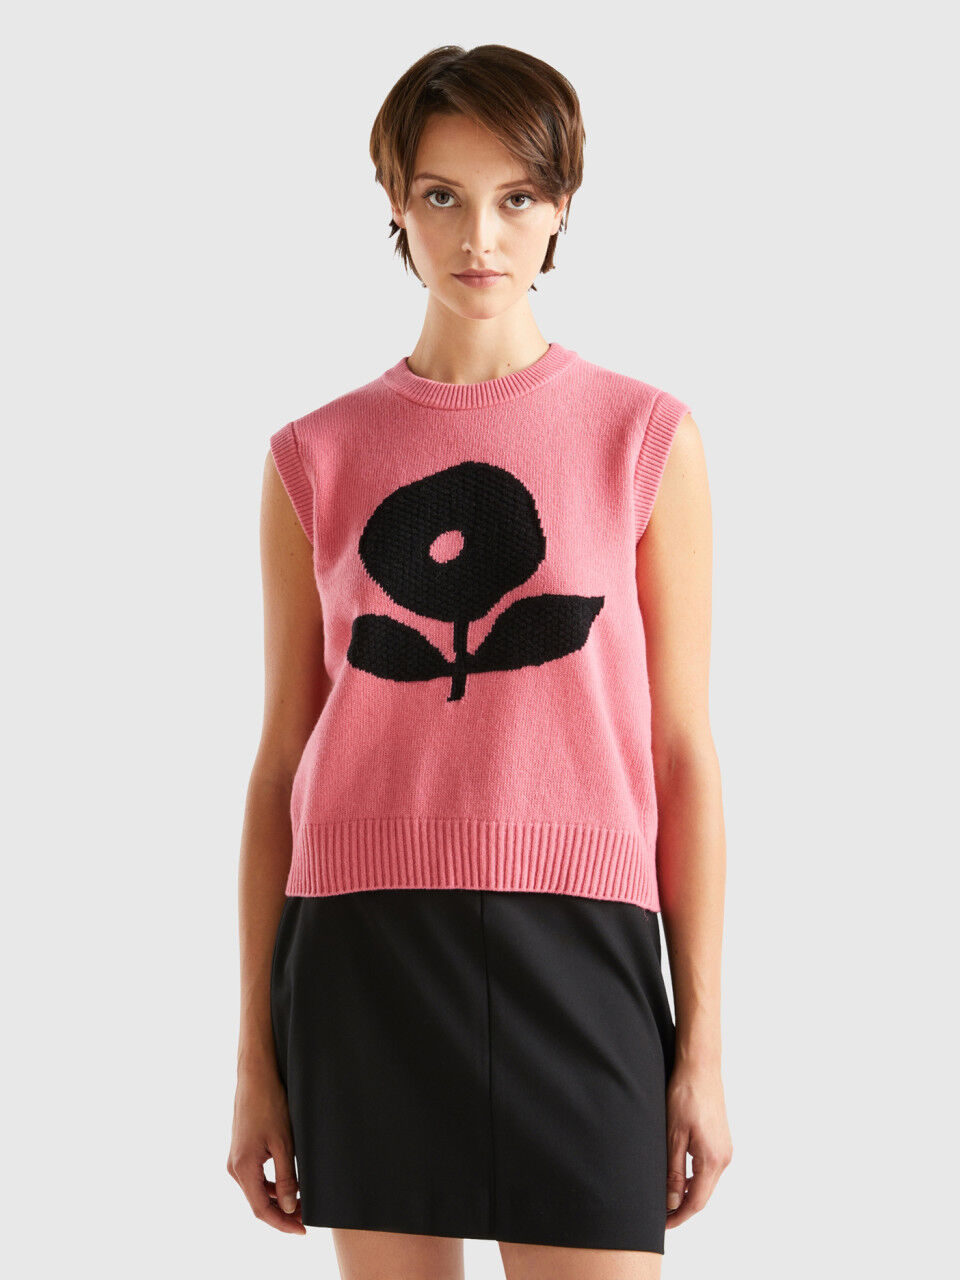 Women's Knit Vests New Collection 2023 | Benetton